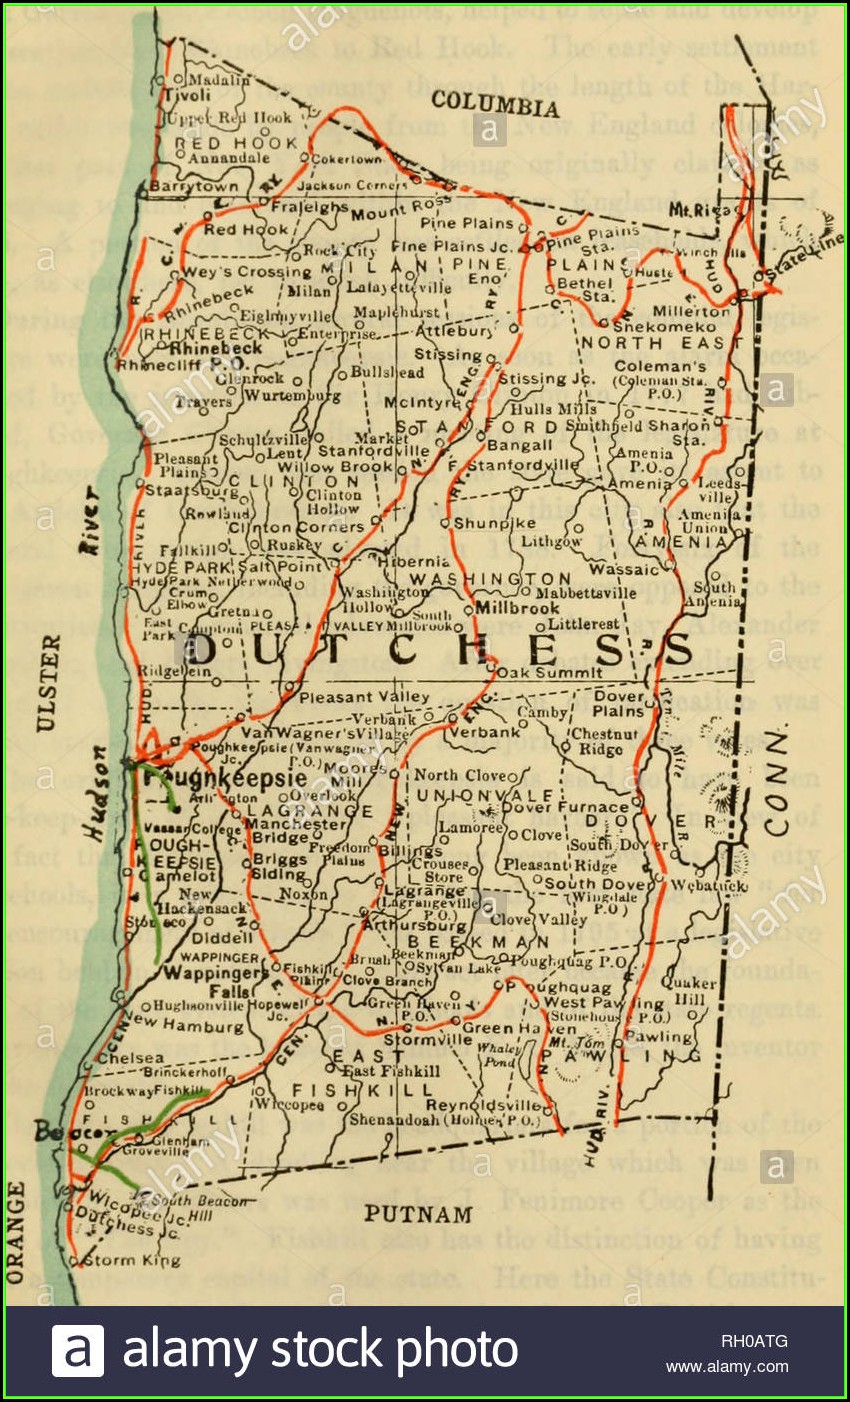 Road Map Of Dutchess County New York